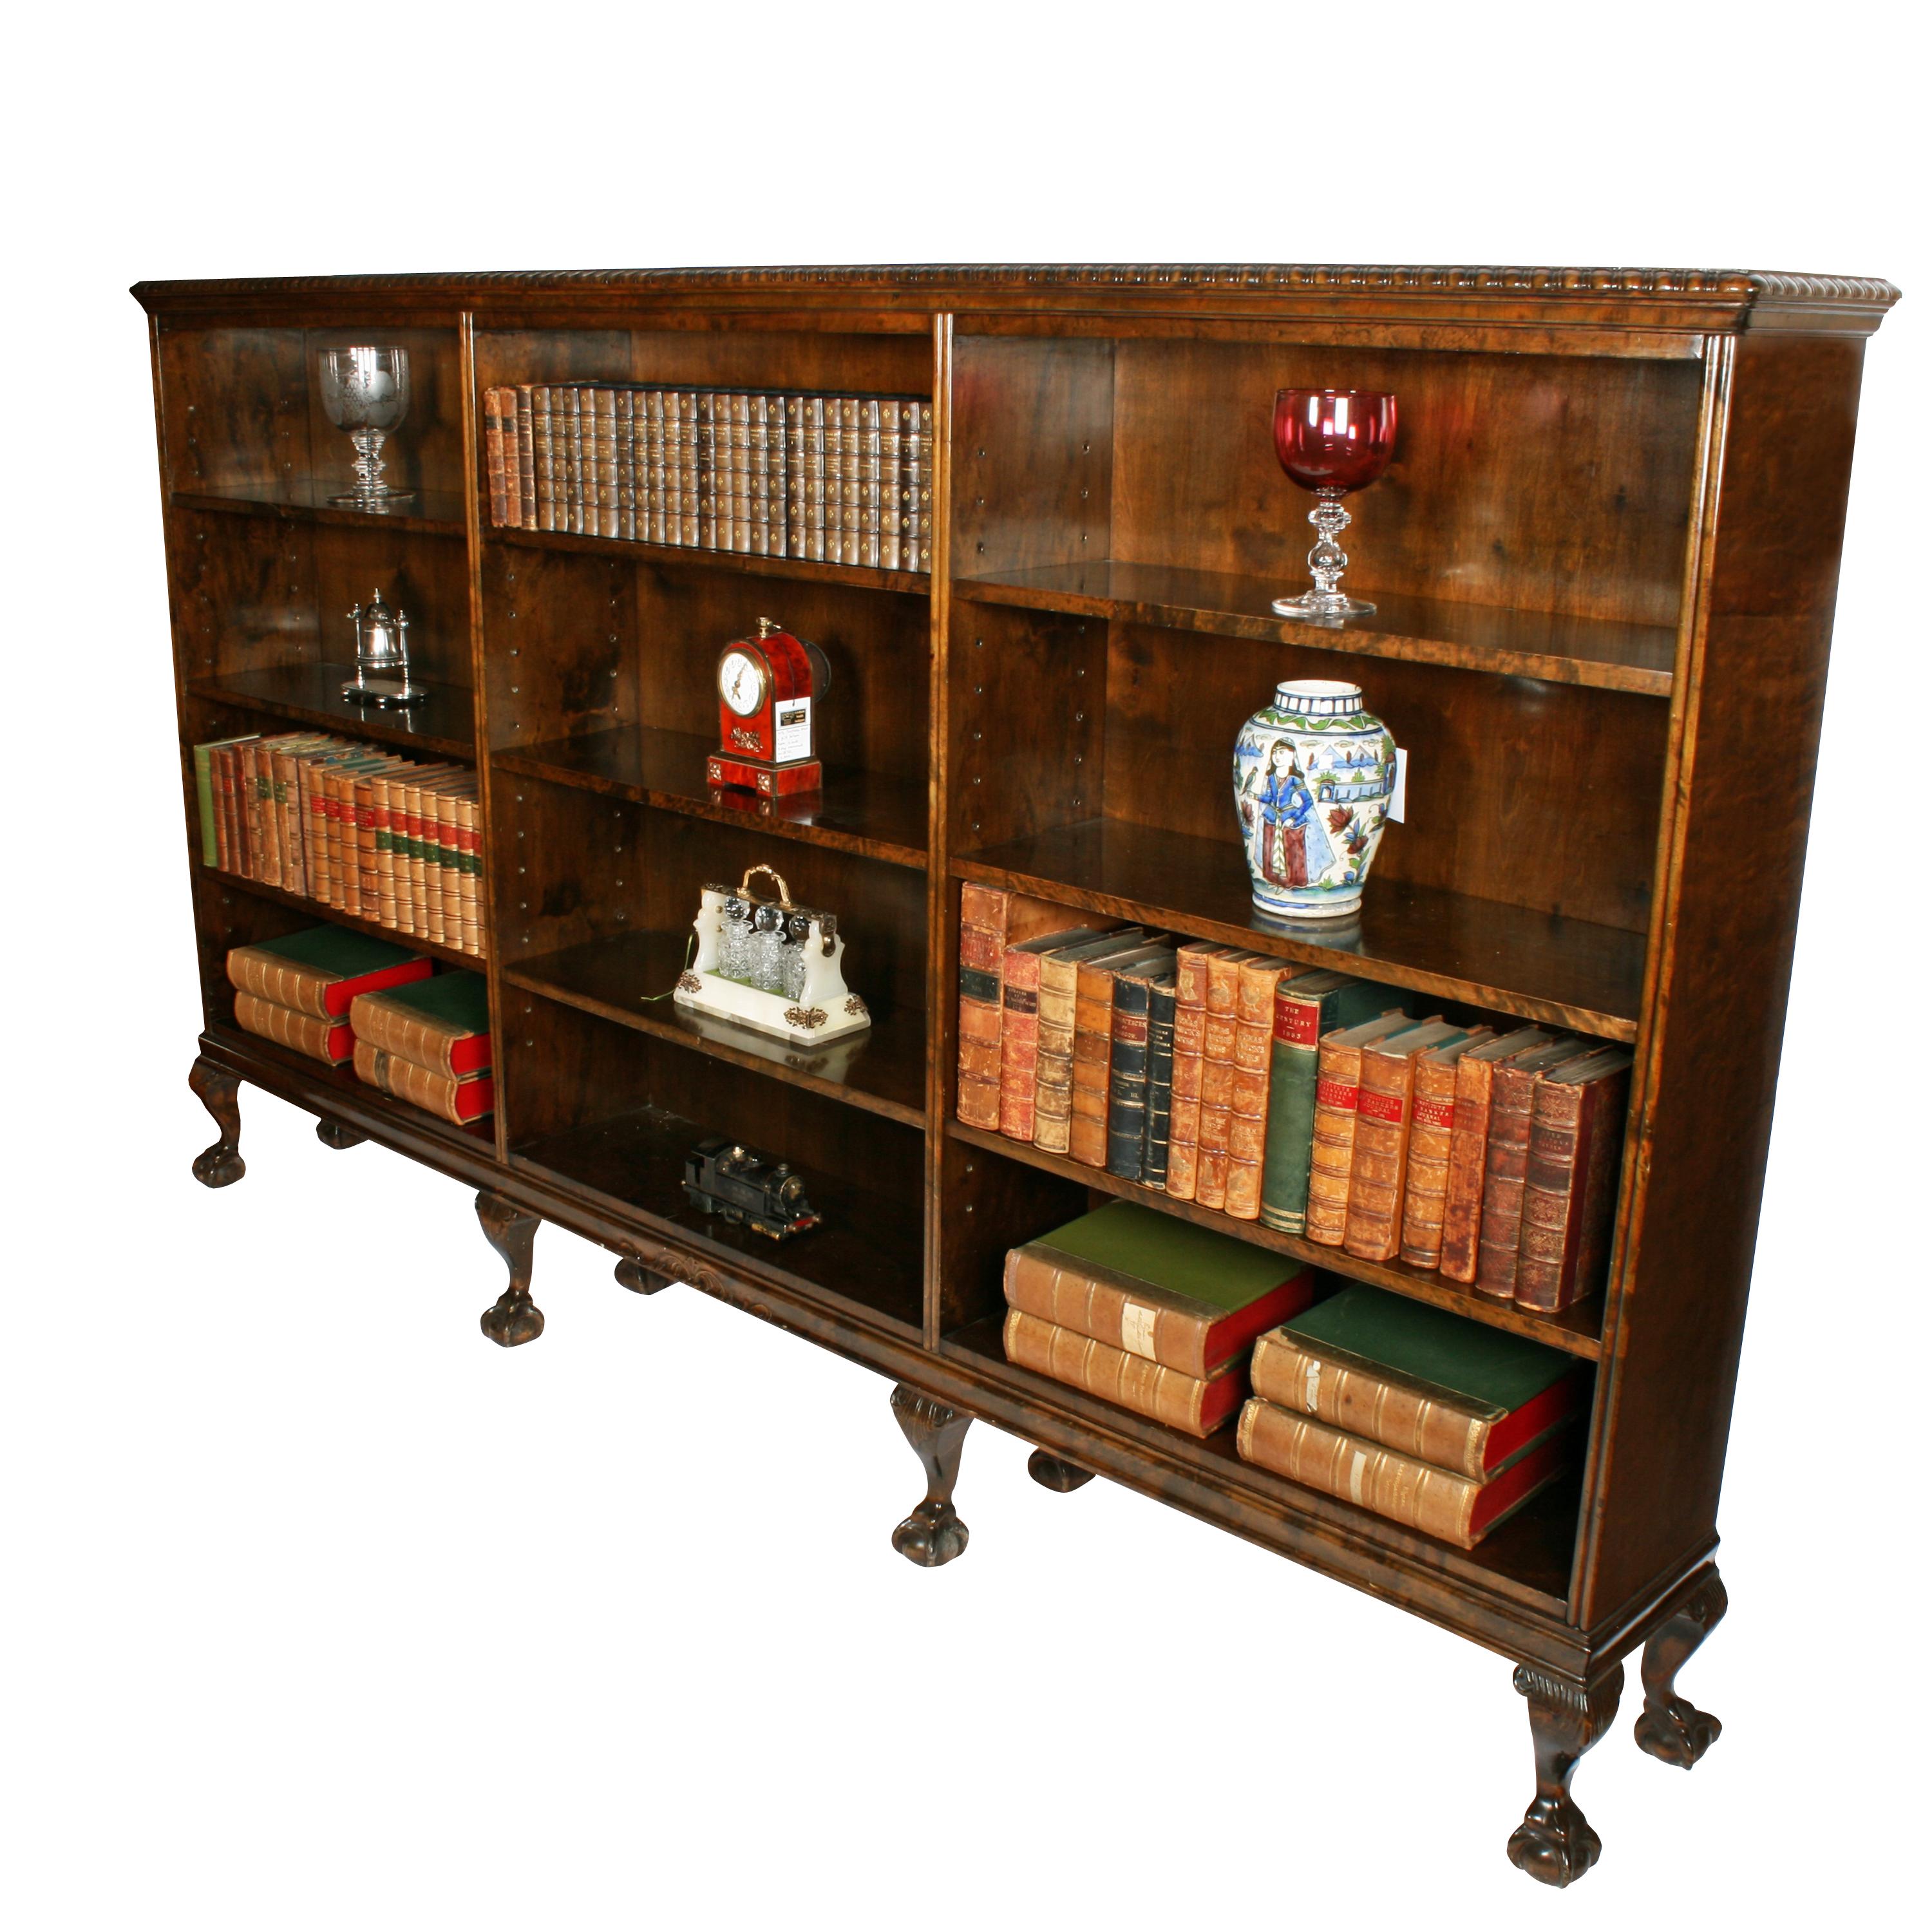 Large Chippendale style open bookcase

A large early 20th century mahogany Chippendale style open bookcase.

The bookcase has three sections each with three adjustable shelves.

The bookcase has a gadrooned carved edge to the top, a carved